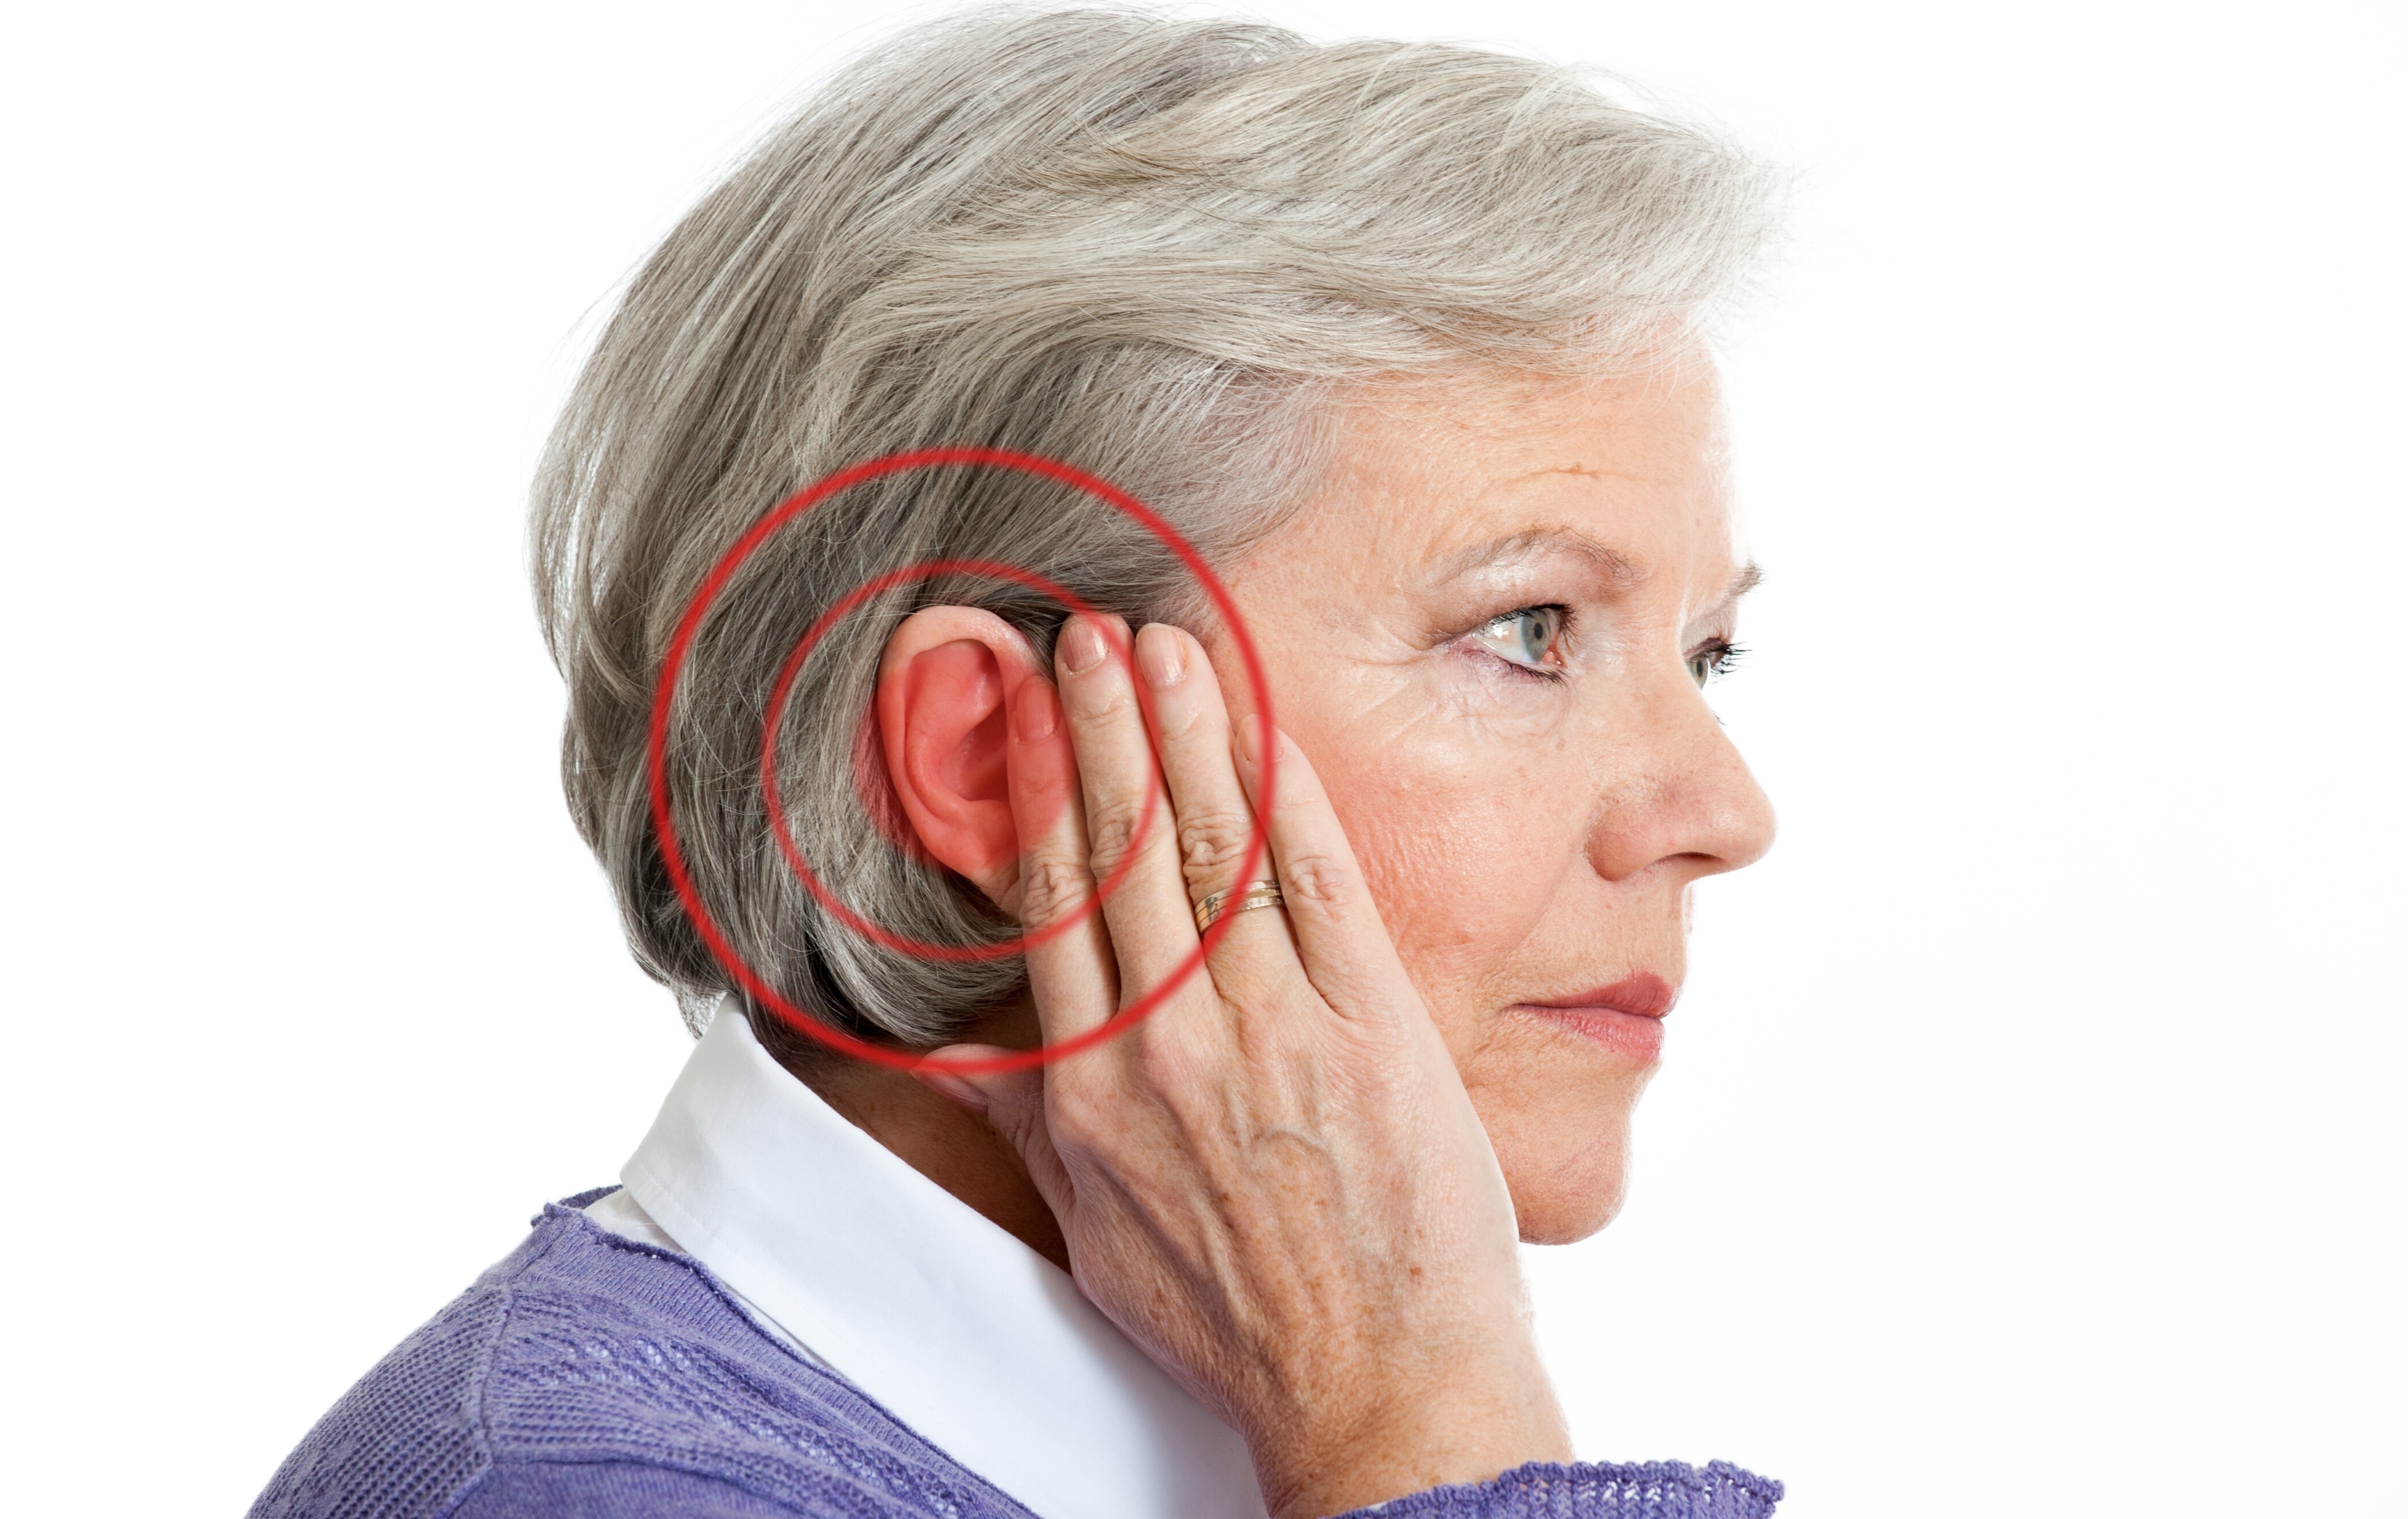 Can a TIA Cause Temporary One-Ear Tinnitus (Ringing)?